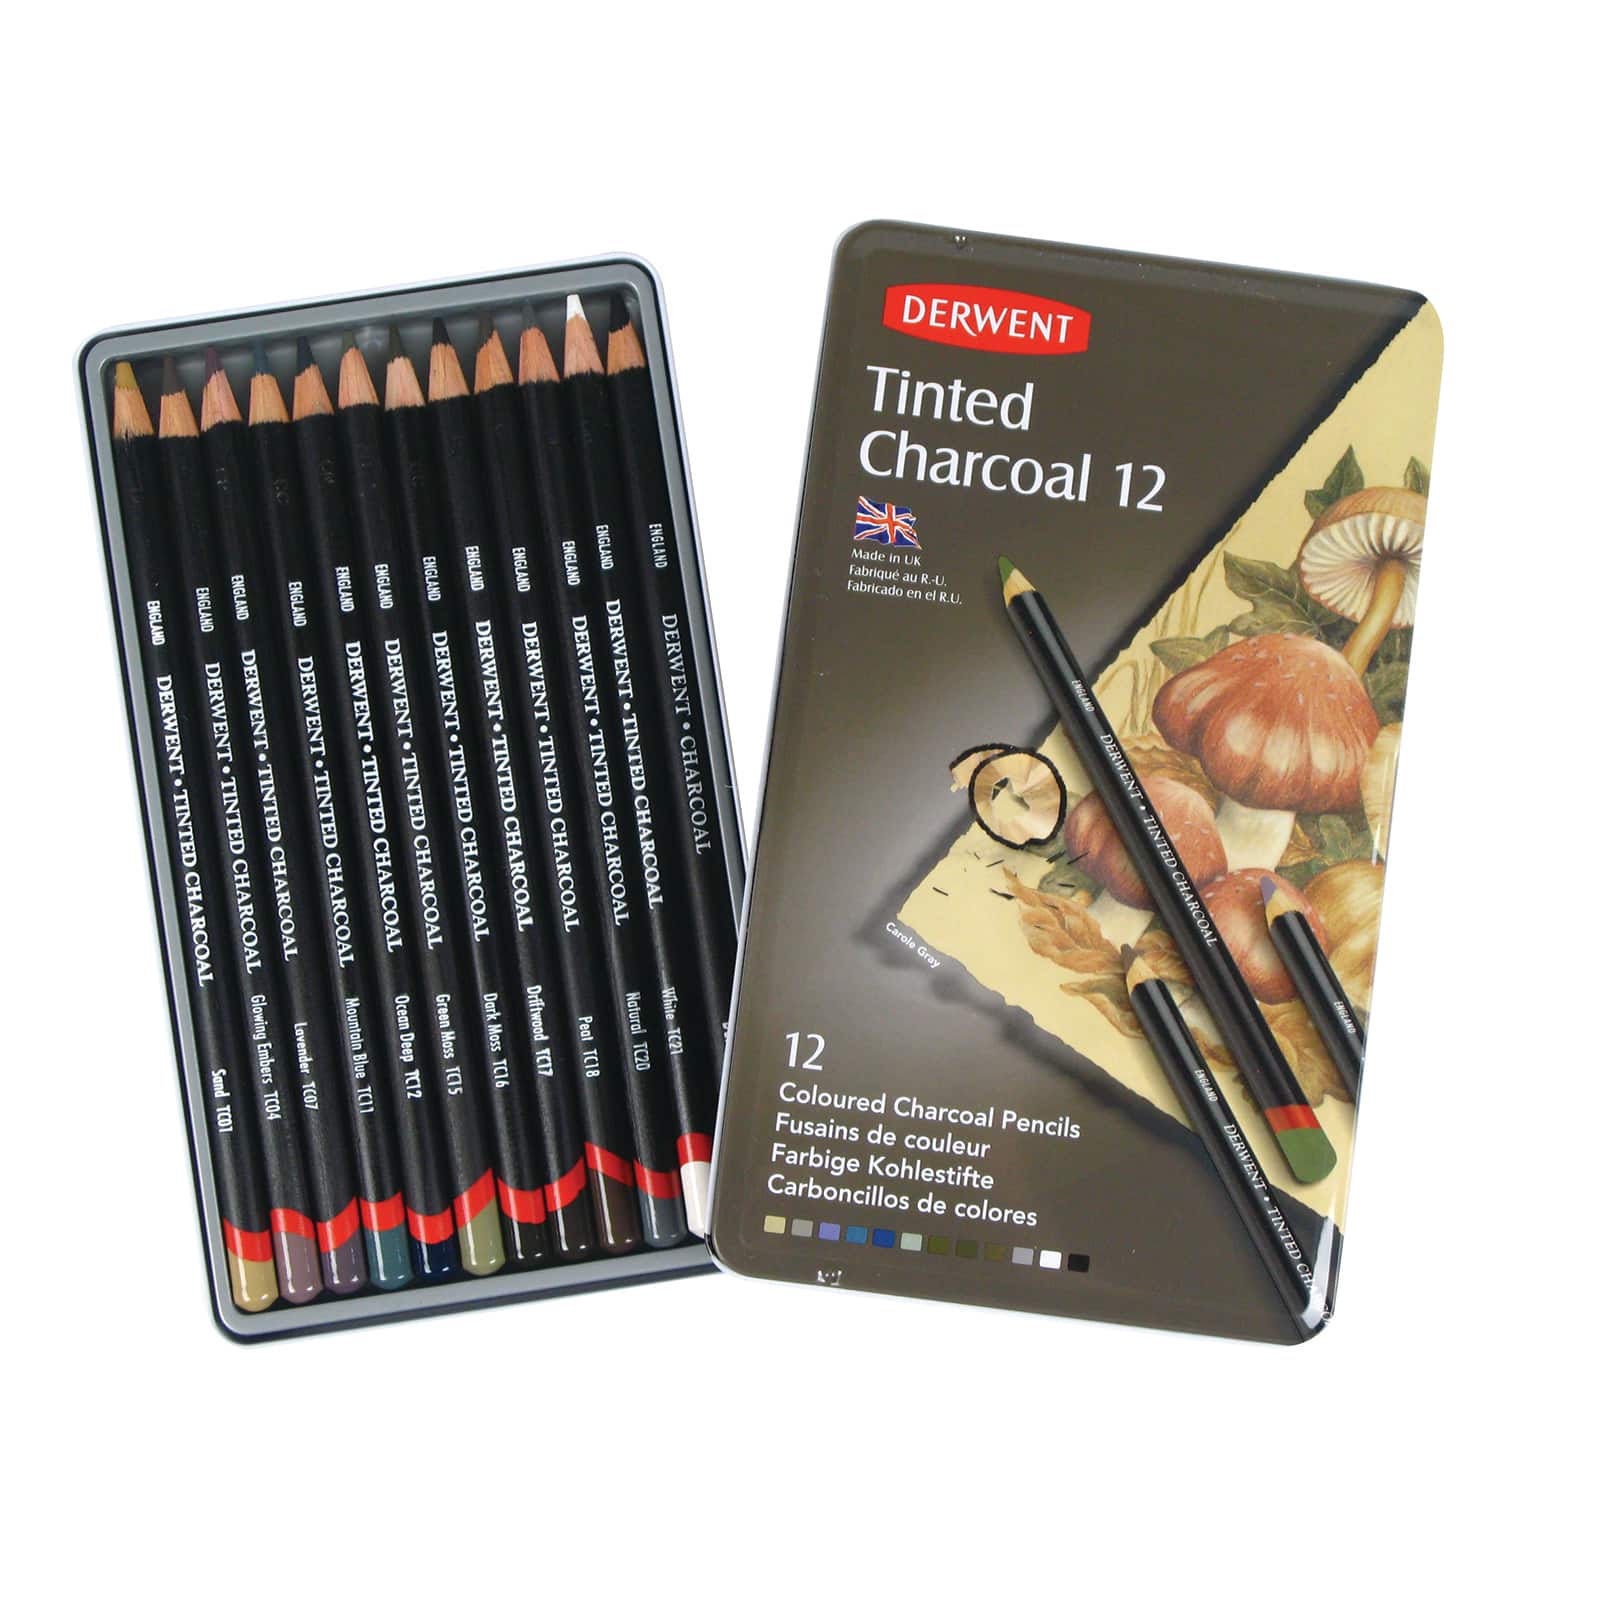 Derwent Tinted Charcoal Pencils, 4mm Core, Metal Tin, 24 Count (2301691)